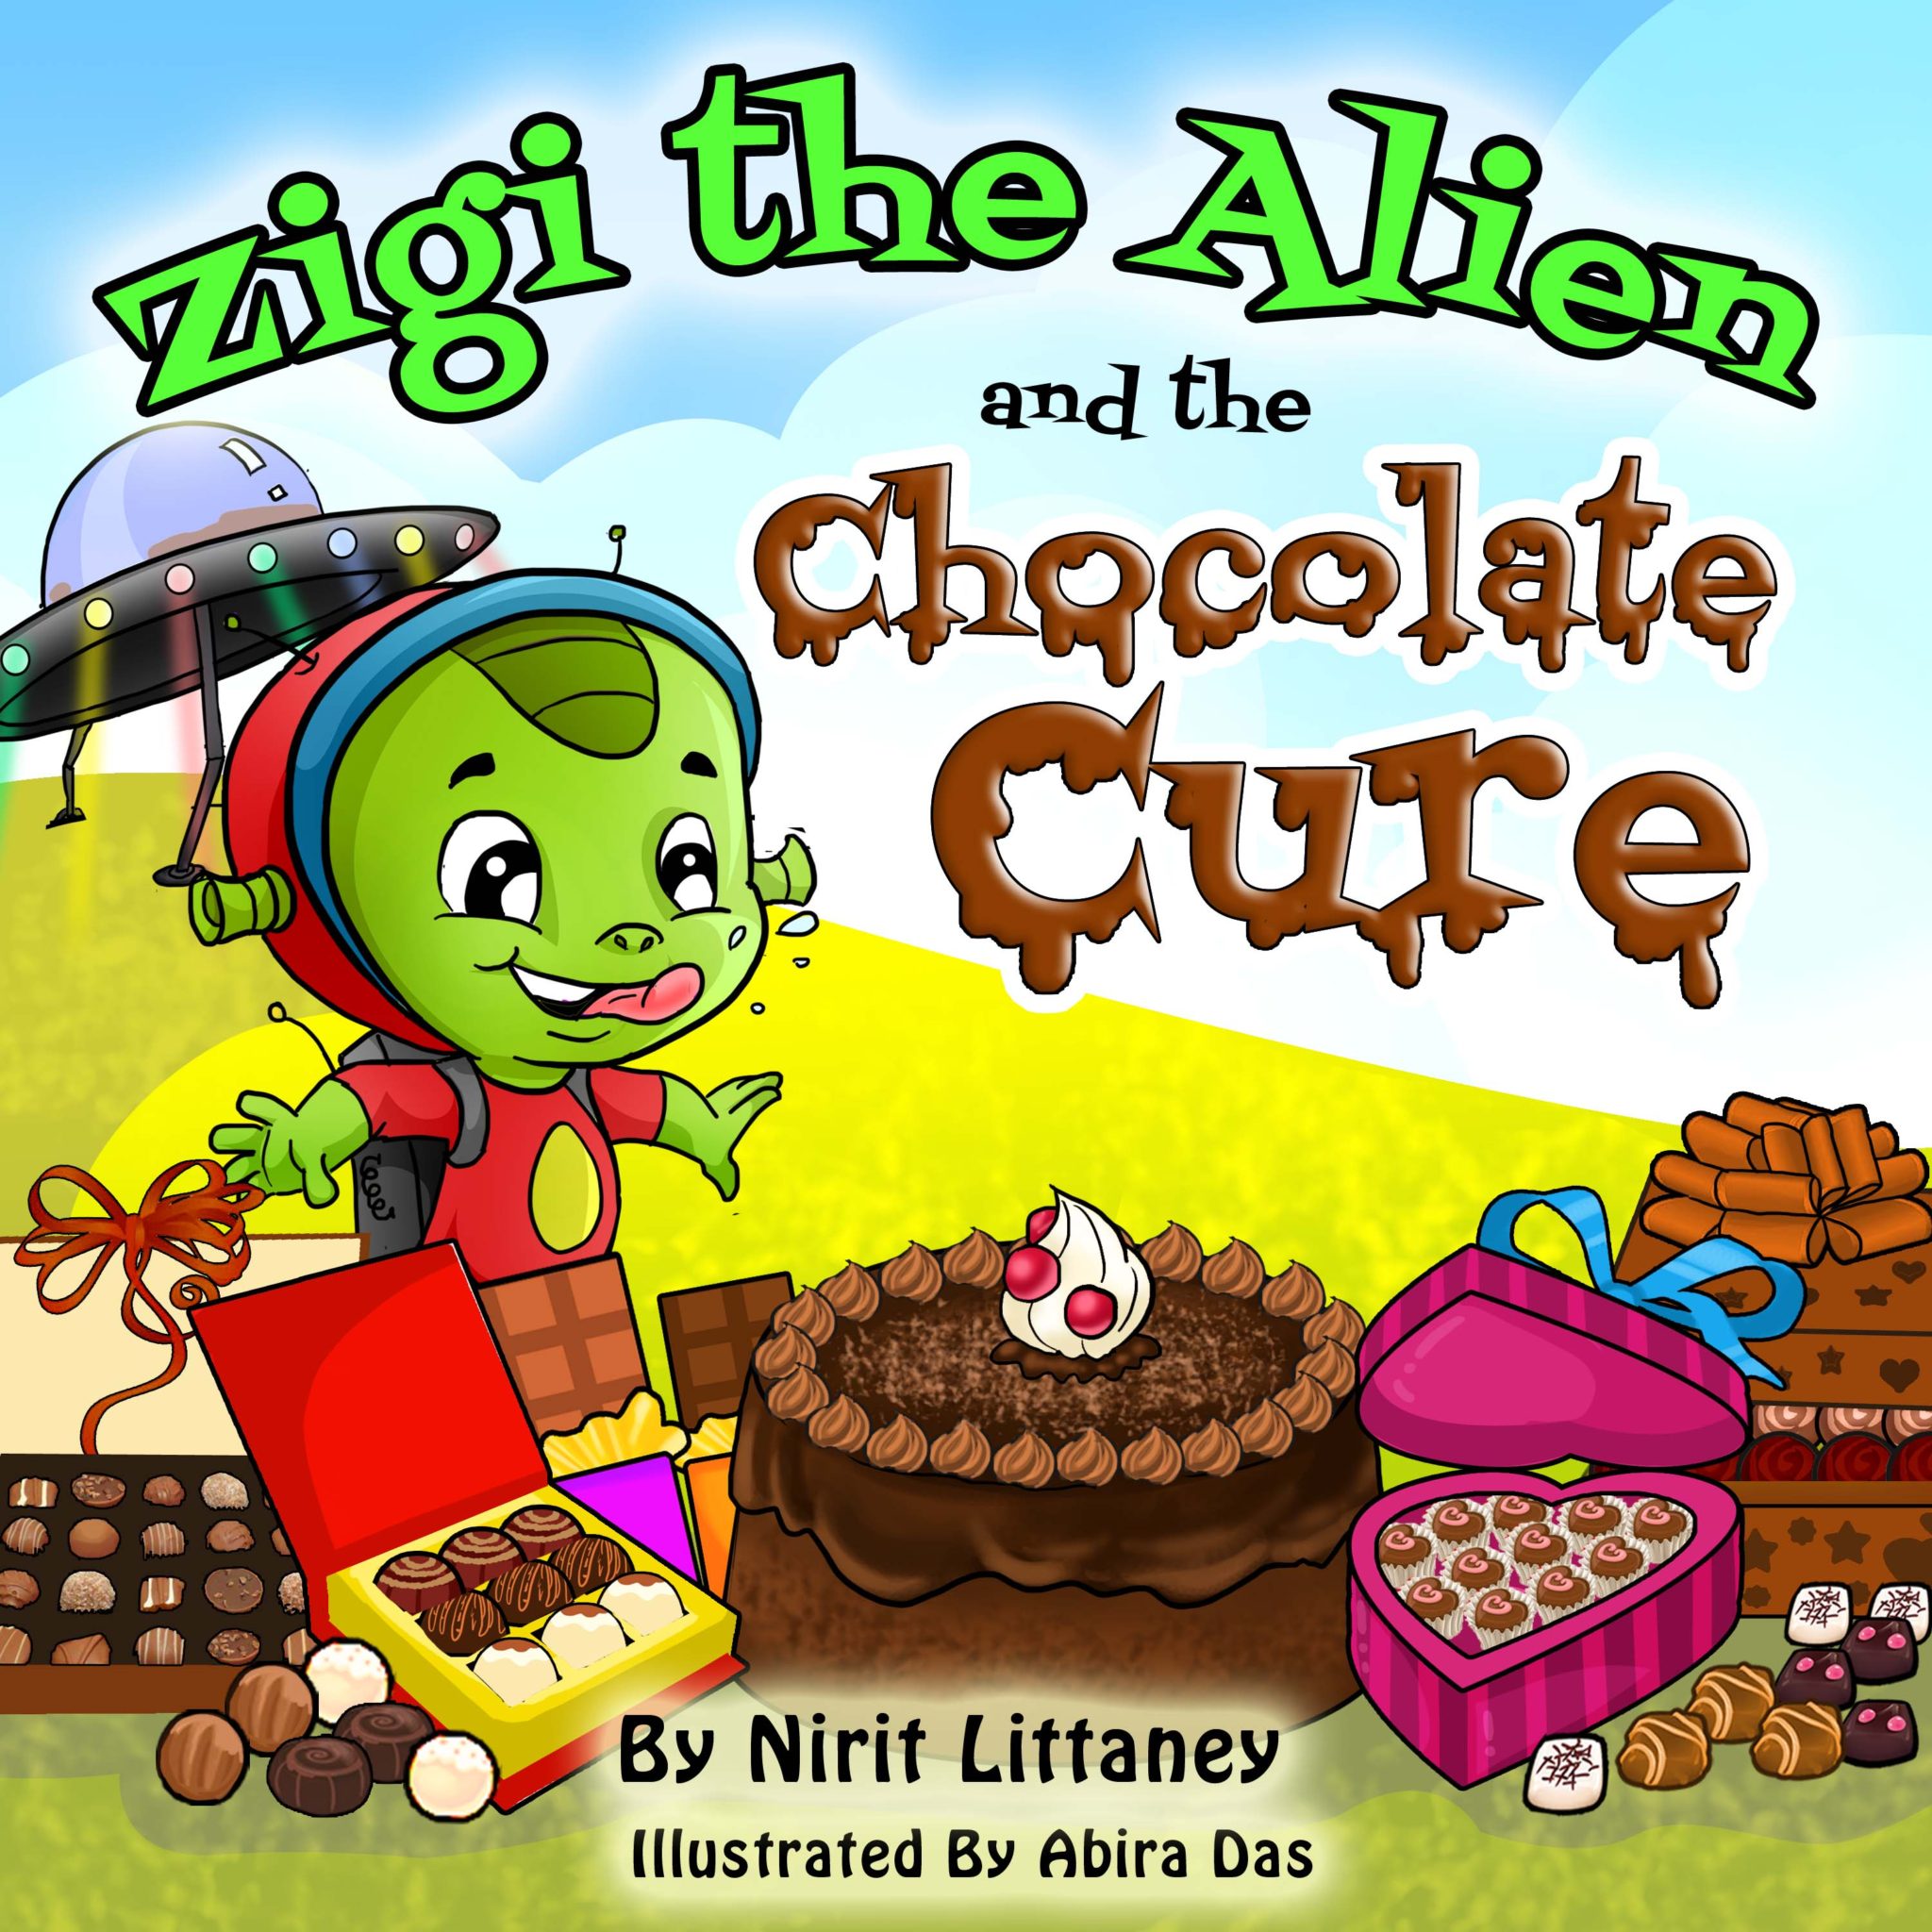 FREE: Zigi the Alien and the Chocolate Cure by Nirit Littaney